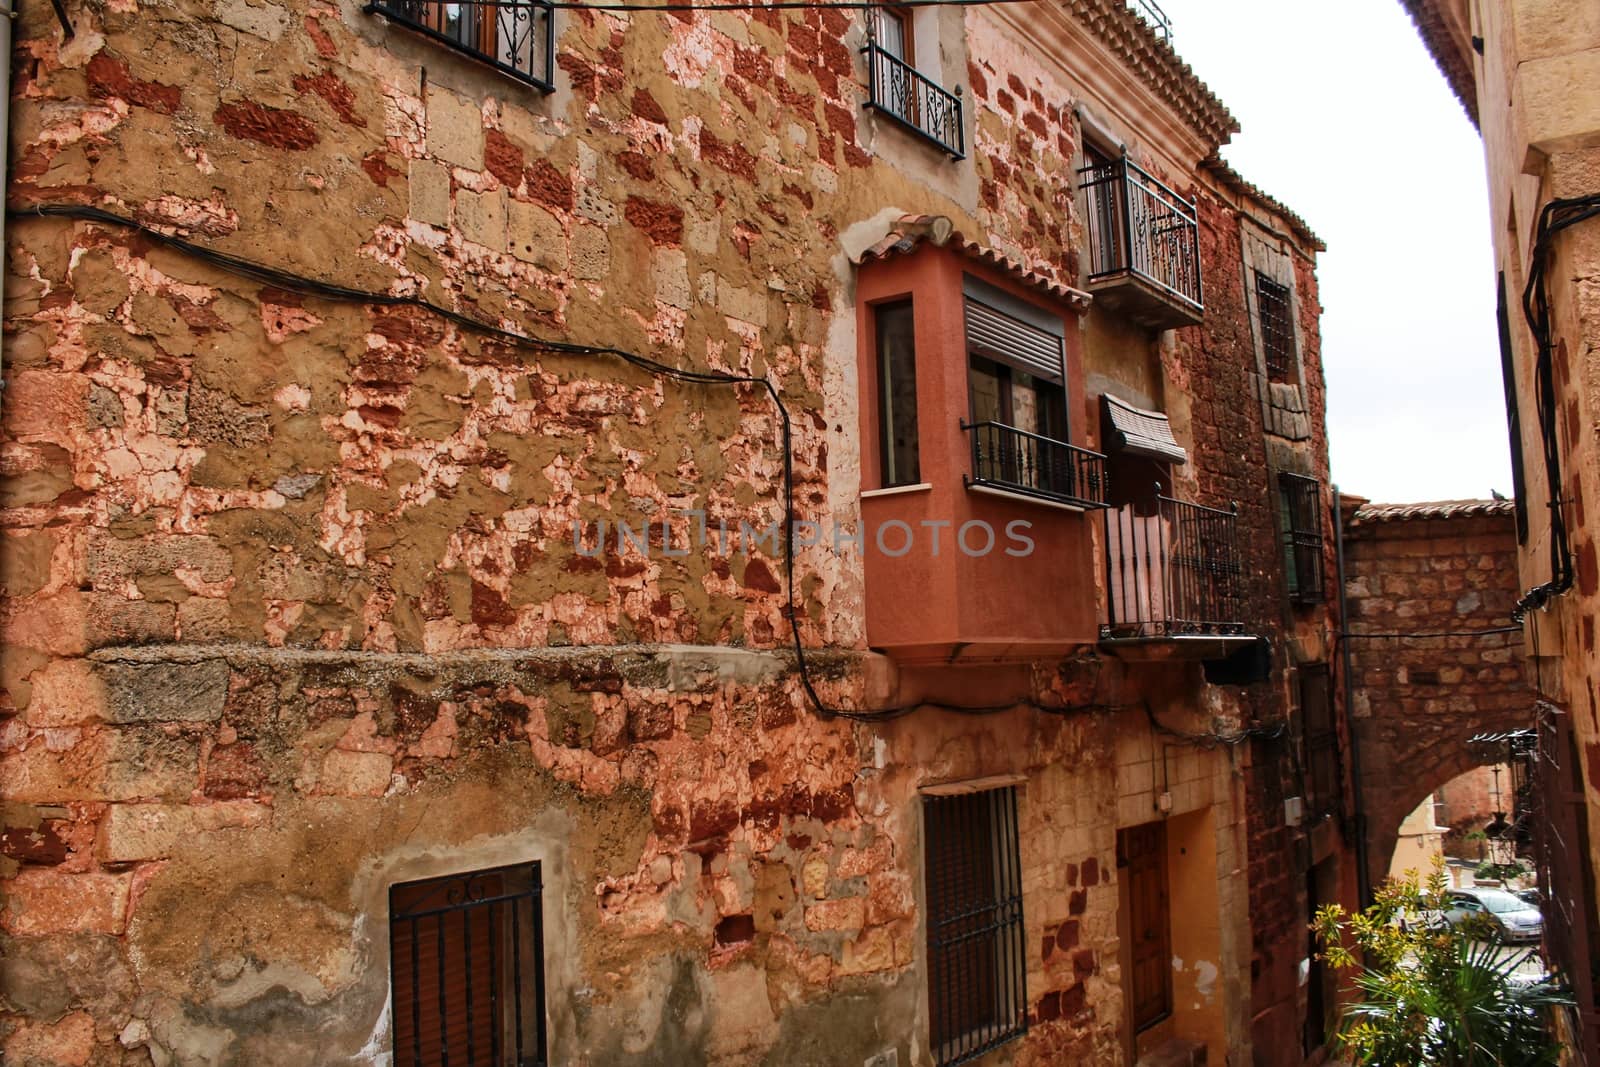 Narrow streets with Renaissance style houses in Alcaraz, Spain by soniabonet